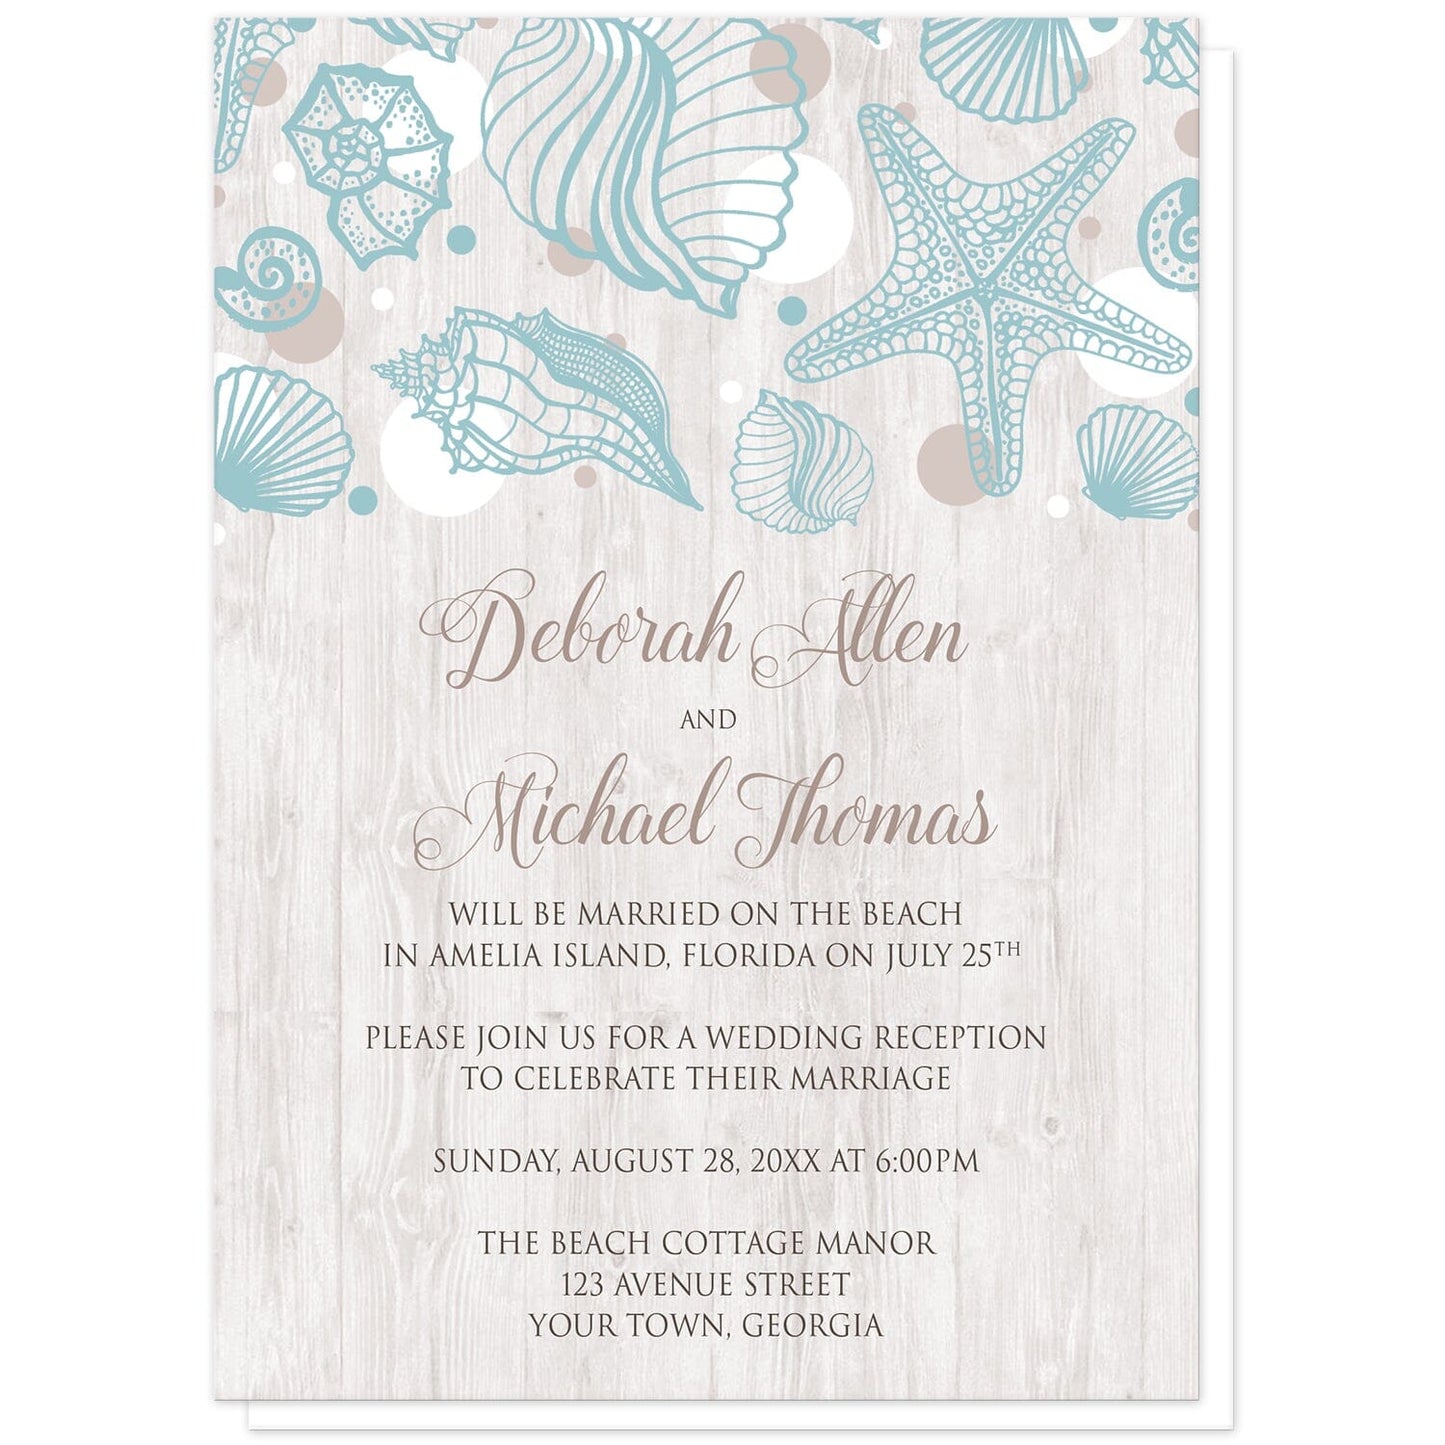 Seashell Whitewashed Wood Beach Reception Only Invitations at Artistically Invited. Rustic-chic seashell whitewashed wood beach reception only invitations with a turquoise seashell line drawing with accent tan and white dots over a light whitewashed wood illustration. Your personalized post-wedding reception details are custom printed in tan and brown over the whitewashed wood background below the seashells.